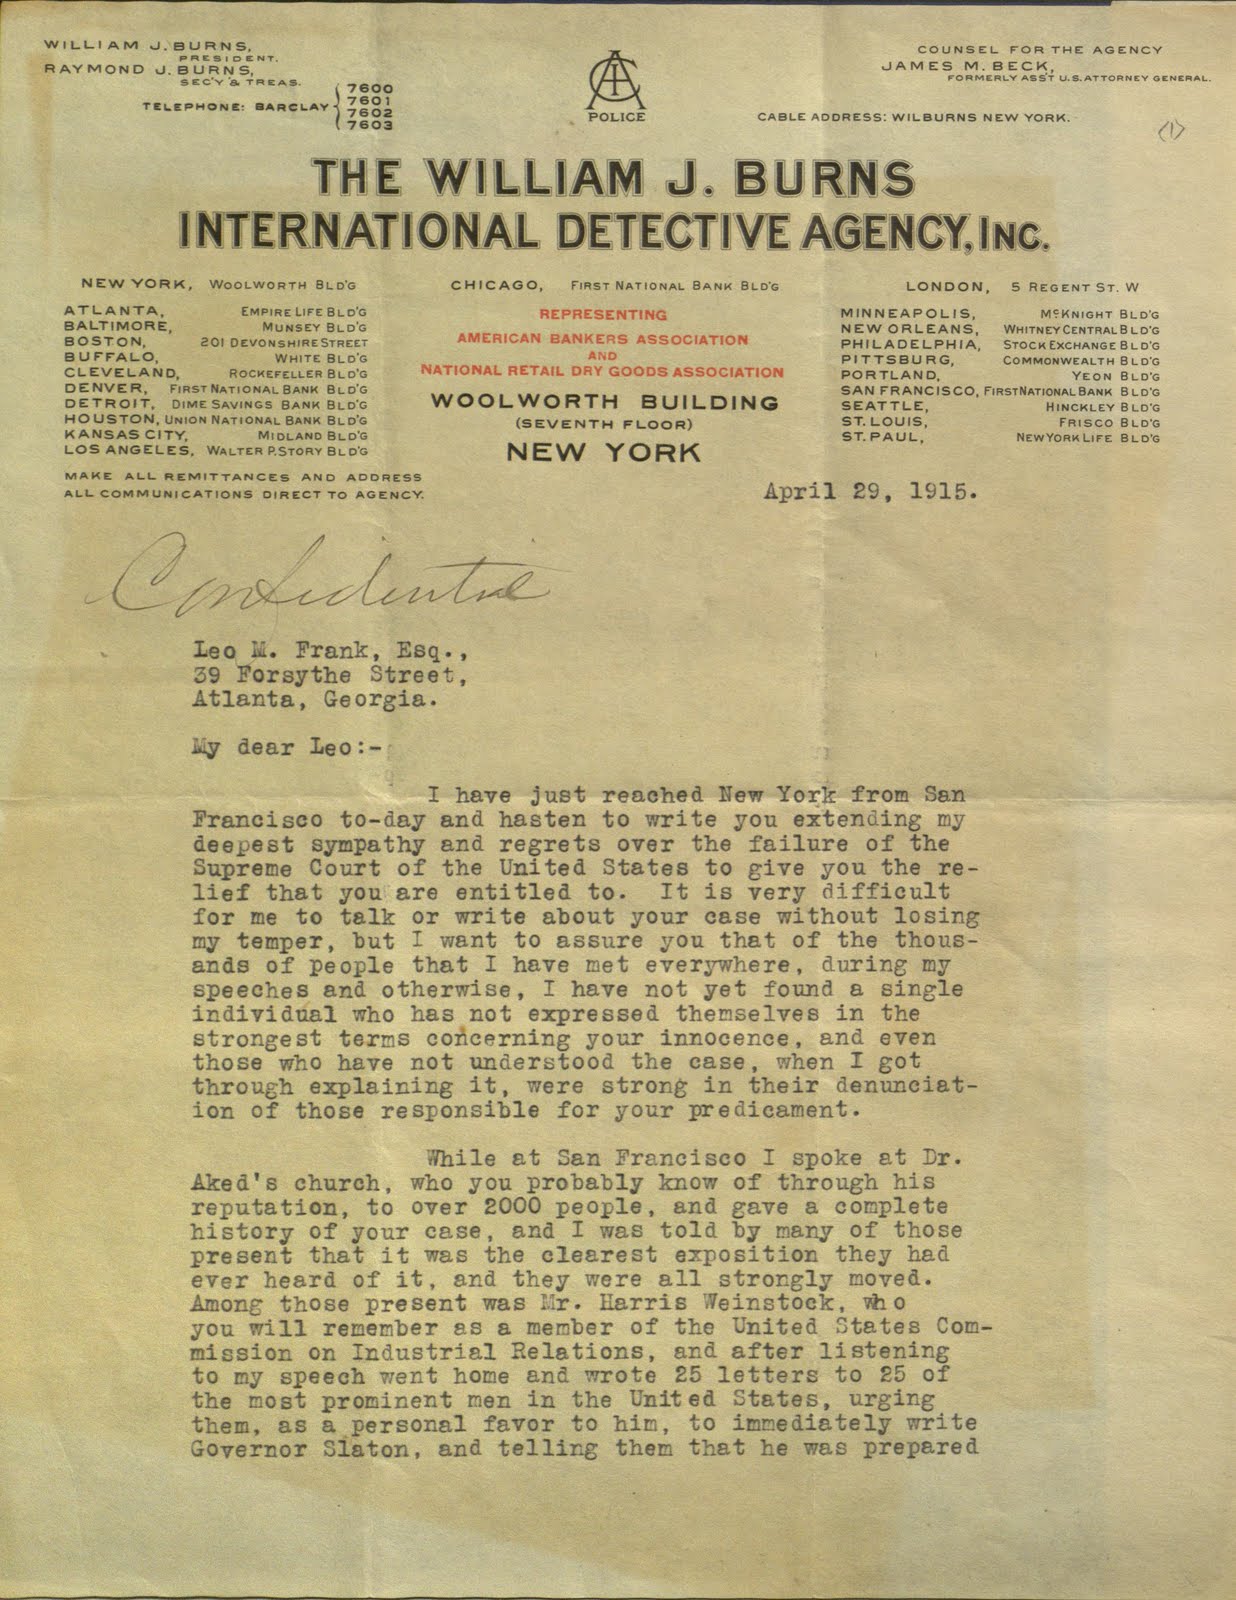 Confidential letter from The William J. Burns International Detective Agency to Leo Frank apologizing for the failure of the Supreme Court to release him from prison (April 29, 1915)